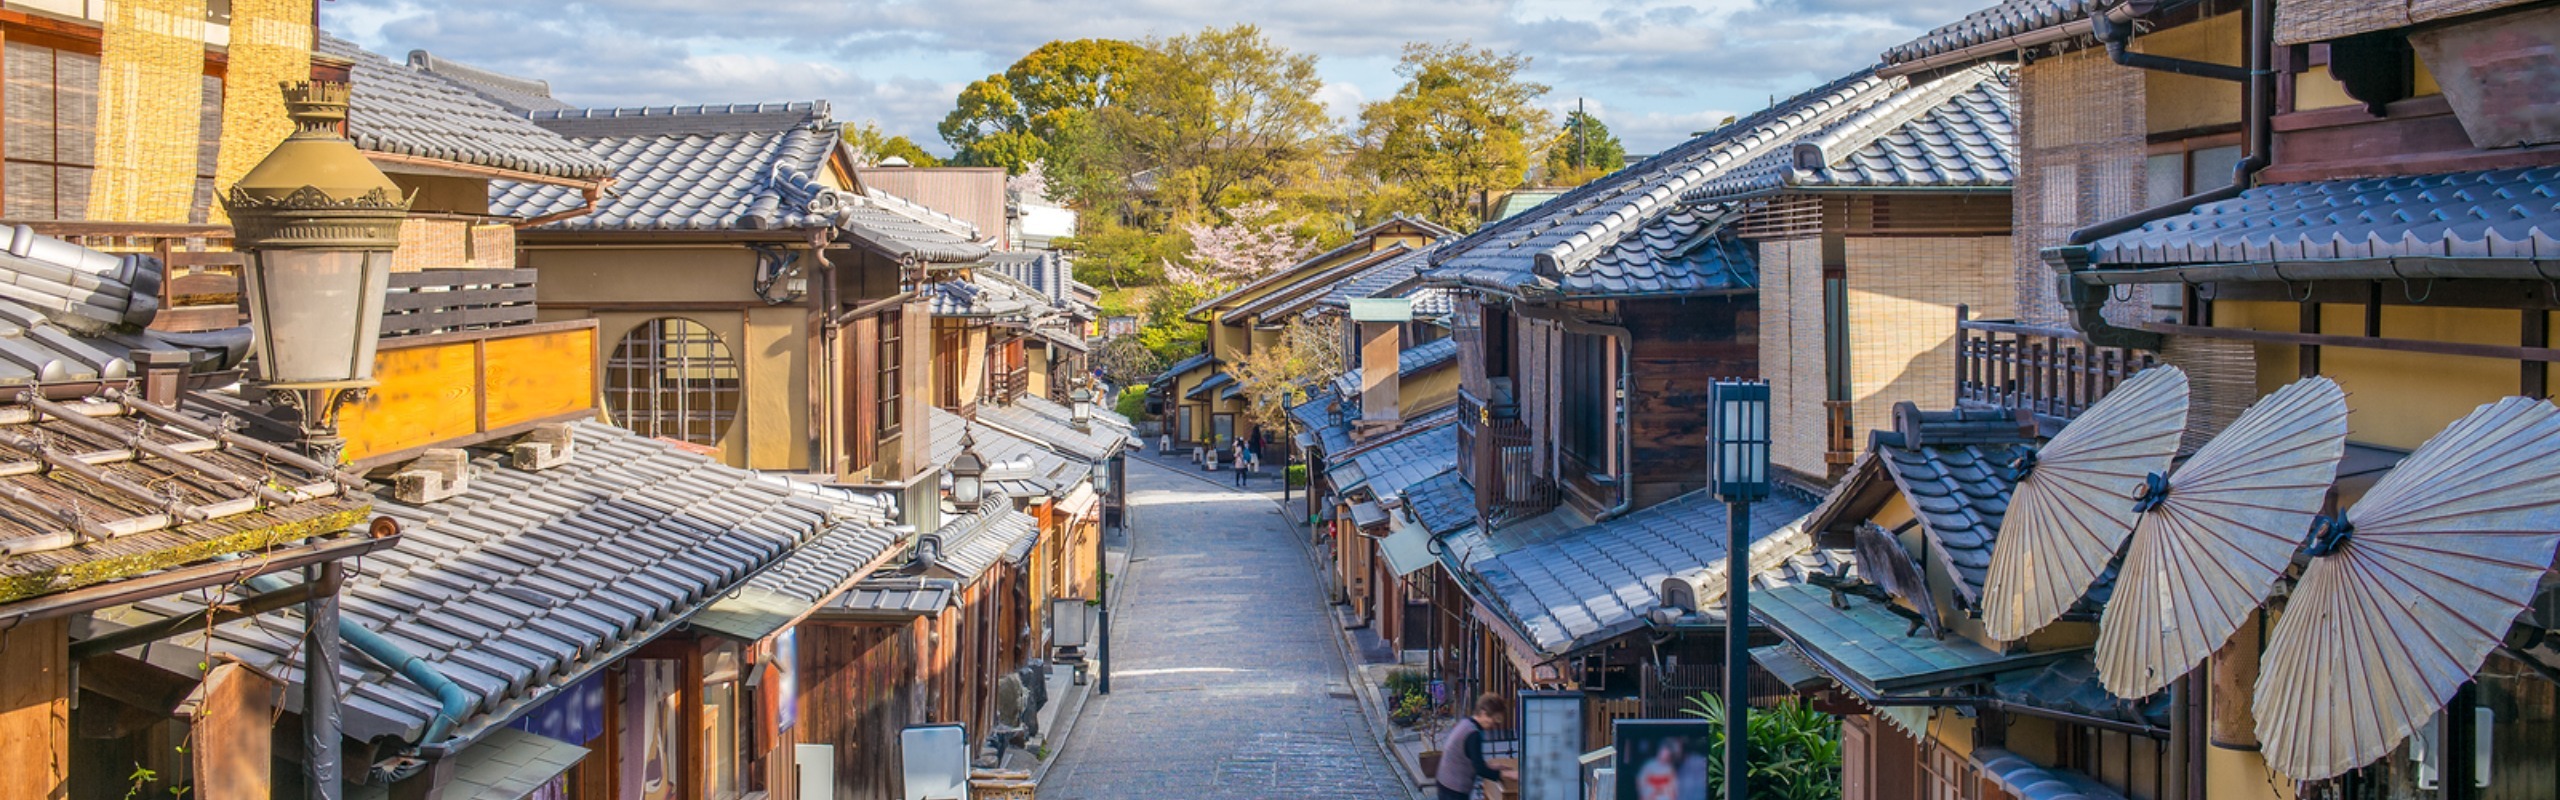 How to Plan Your Trip to Japan 2022/2023 - 7 Things to Know